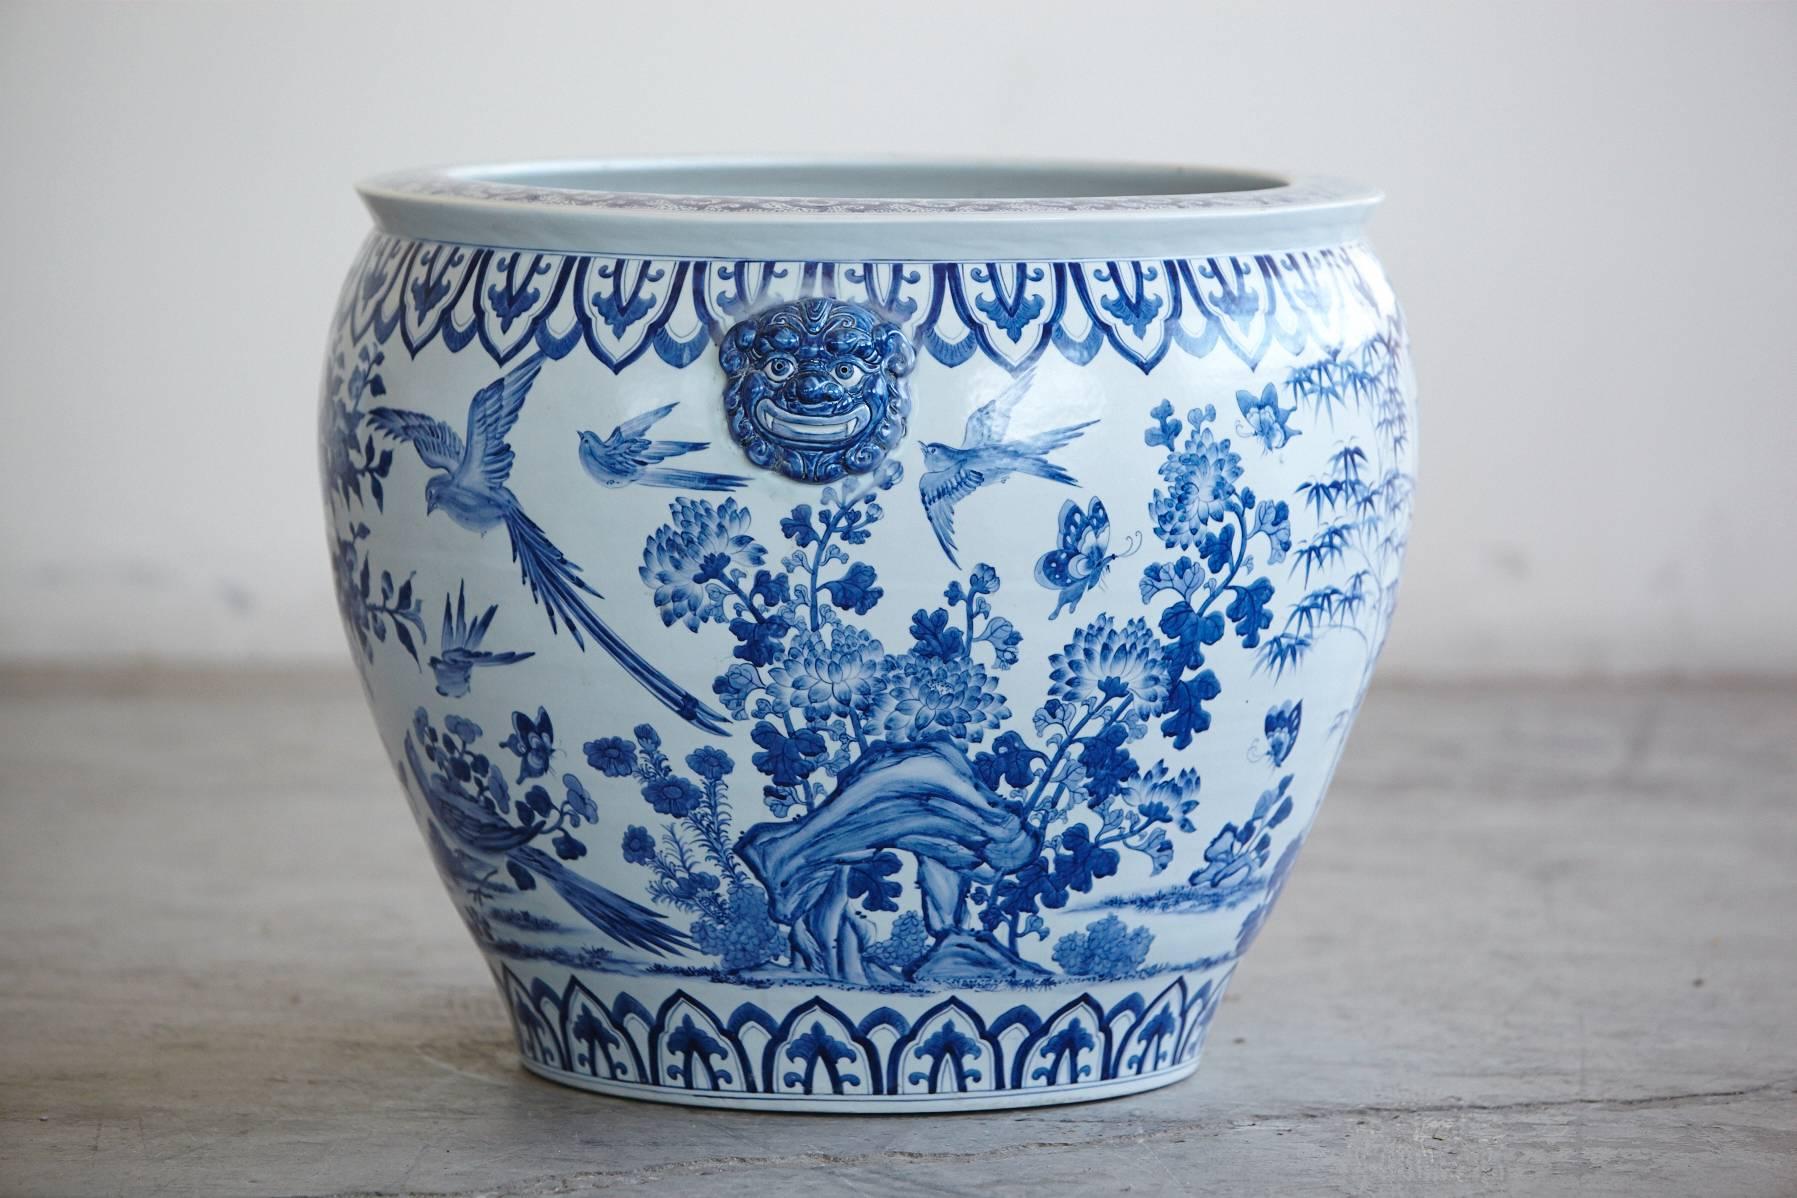 Glazed Large Chinese Blue and White Porcelain Jardinière or Planter